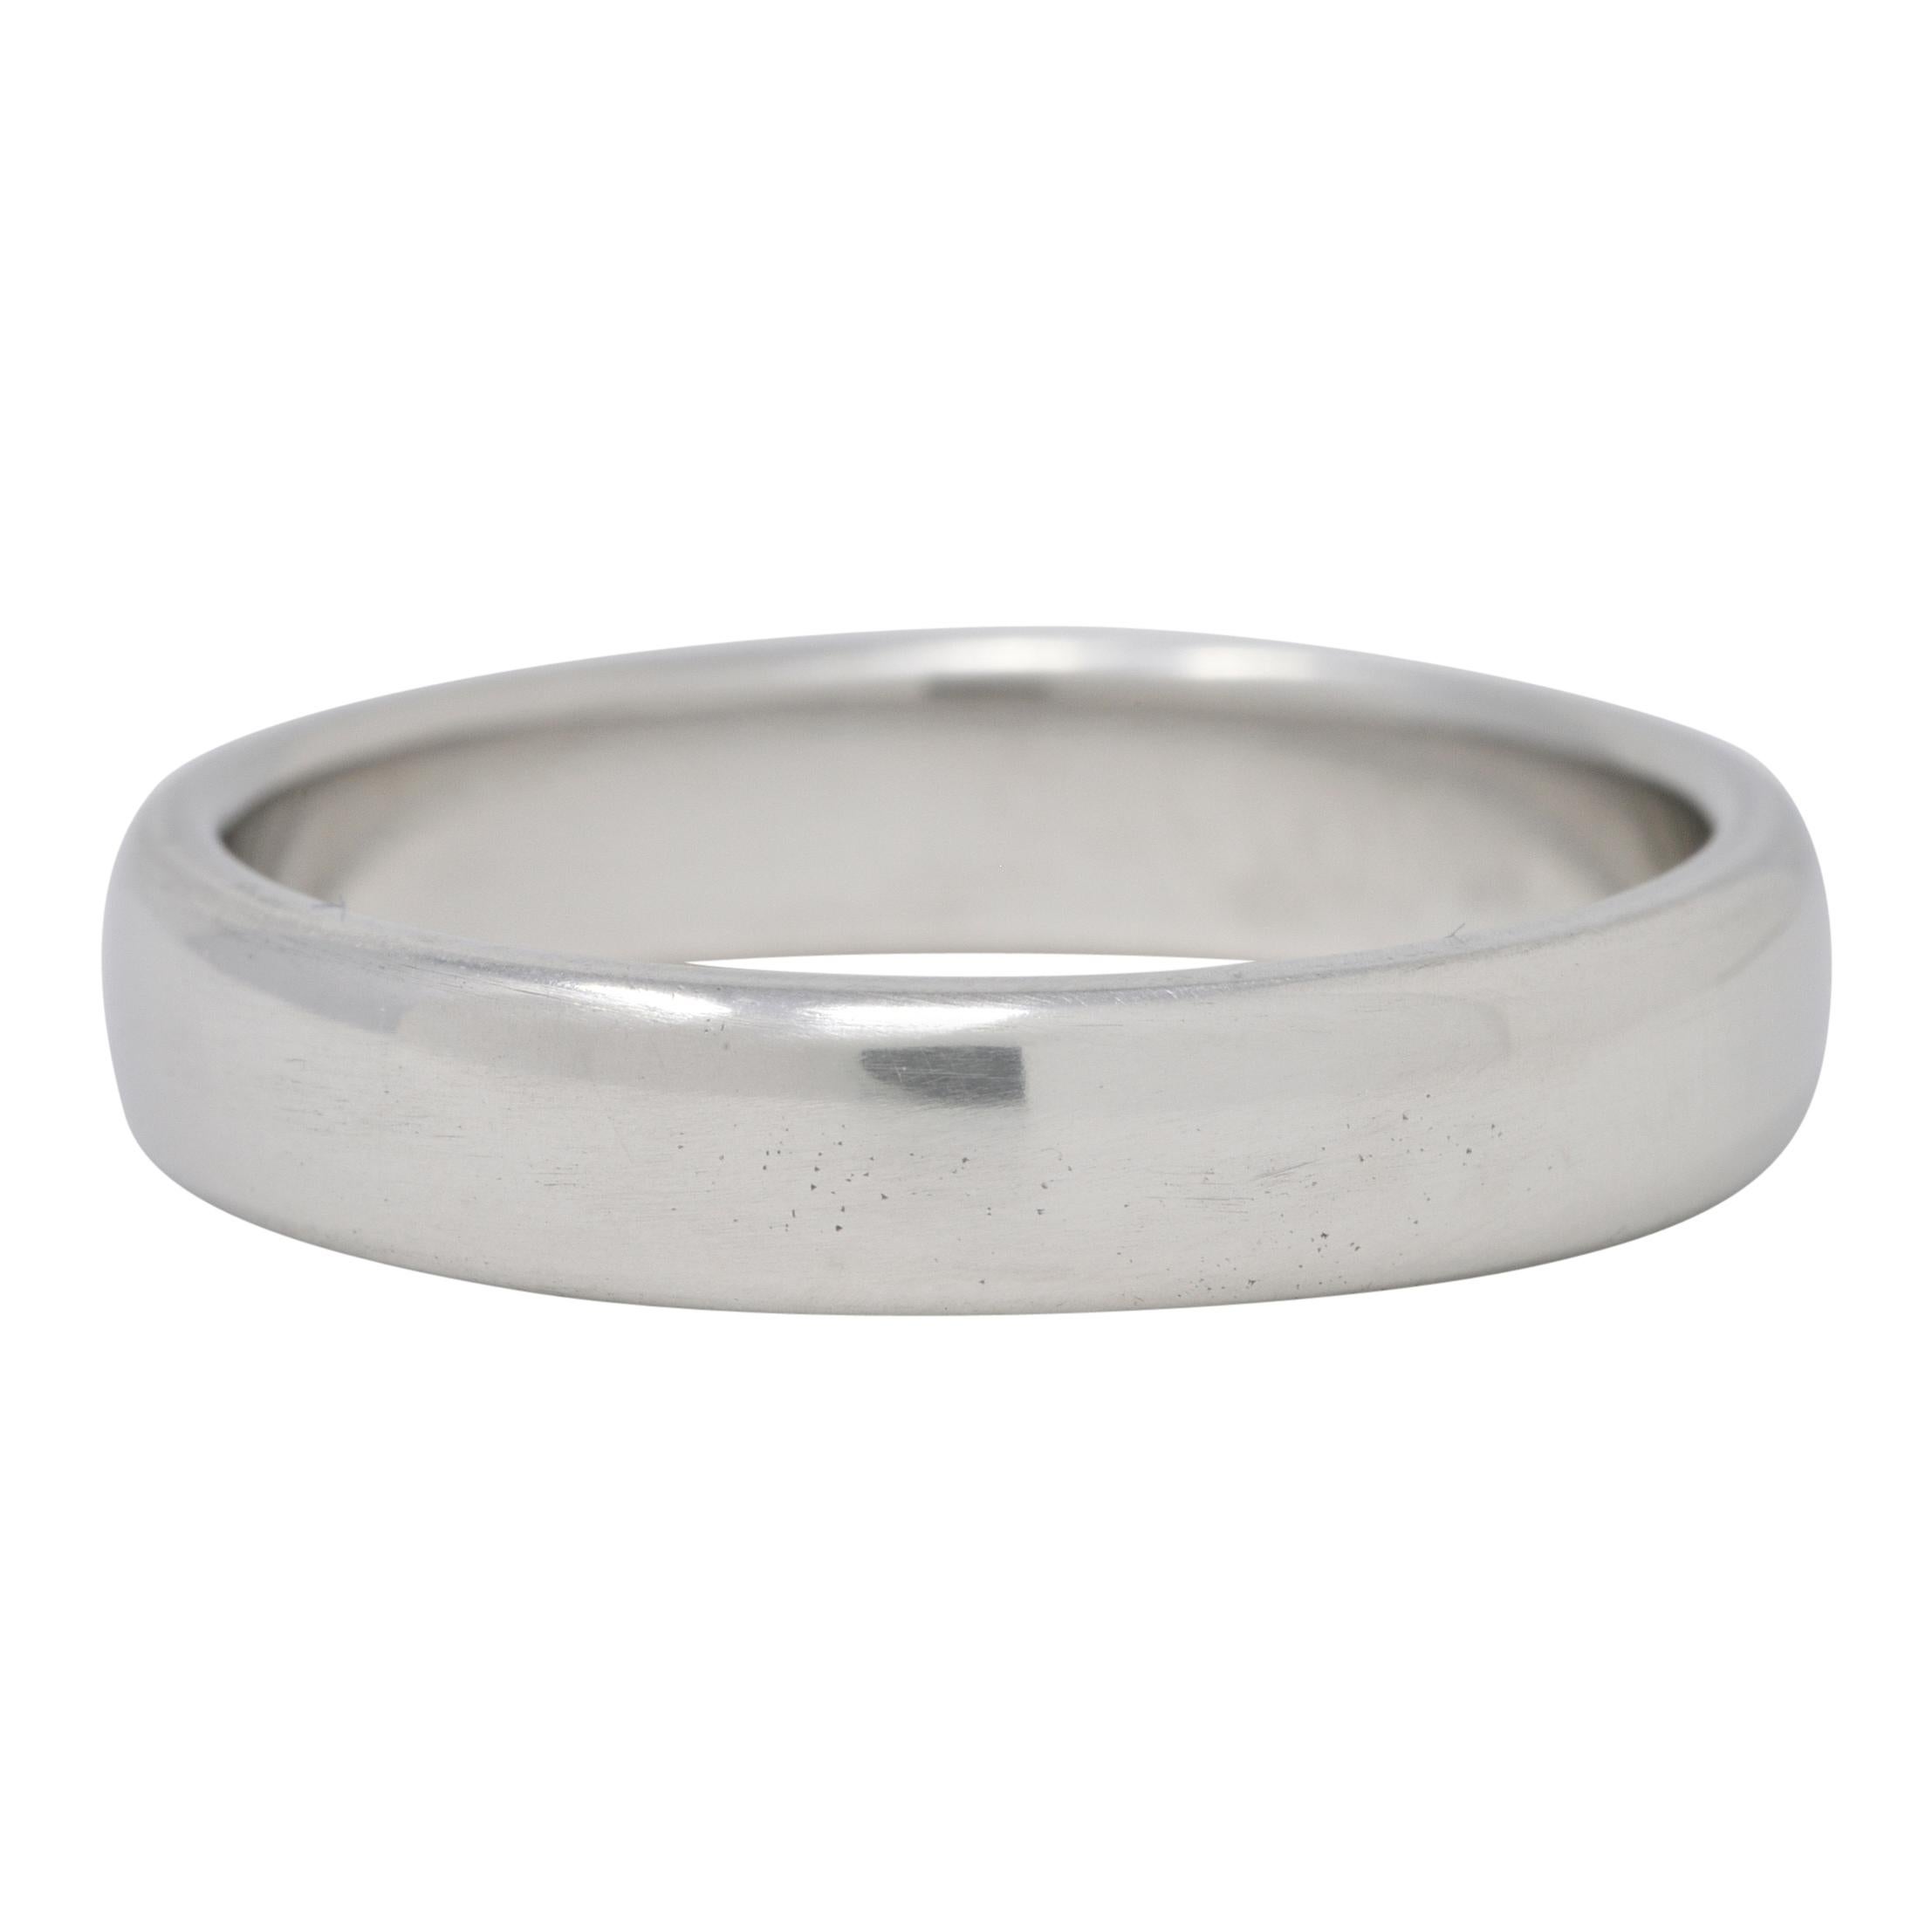 Designed as a comfort fit style band with rounded edges
Completed by a high polish
Stamped PT950 for platinum
Fully signed for Tiffany & Co.
Circa: 1999; via dated inscription
Ring Size: 9 and sizable
Measures 4.5 mm north to south and sits 2.0 mm